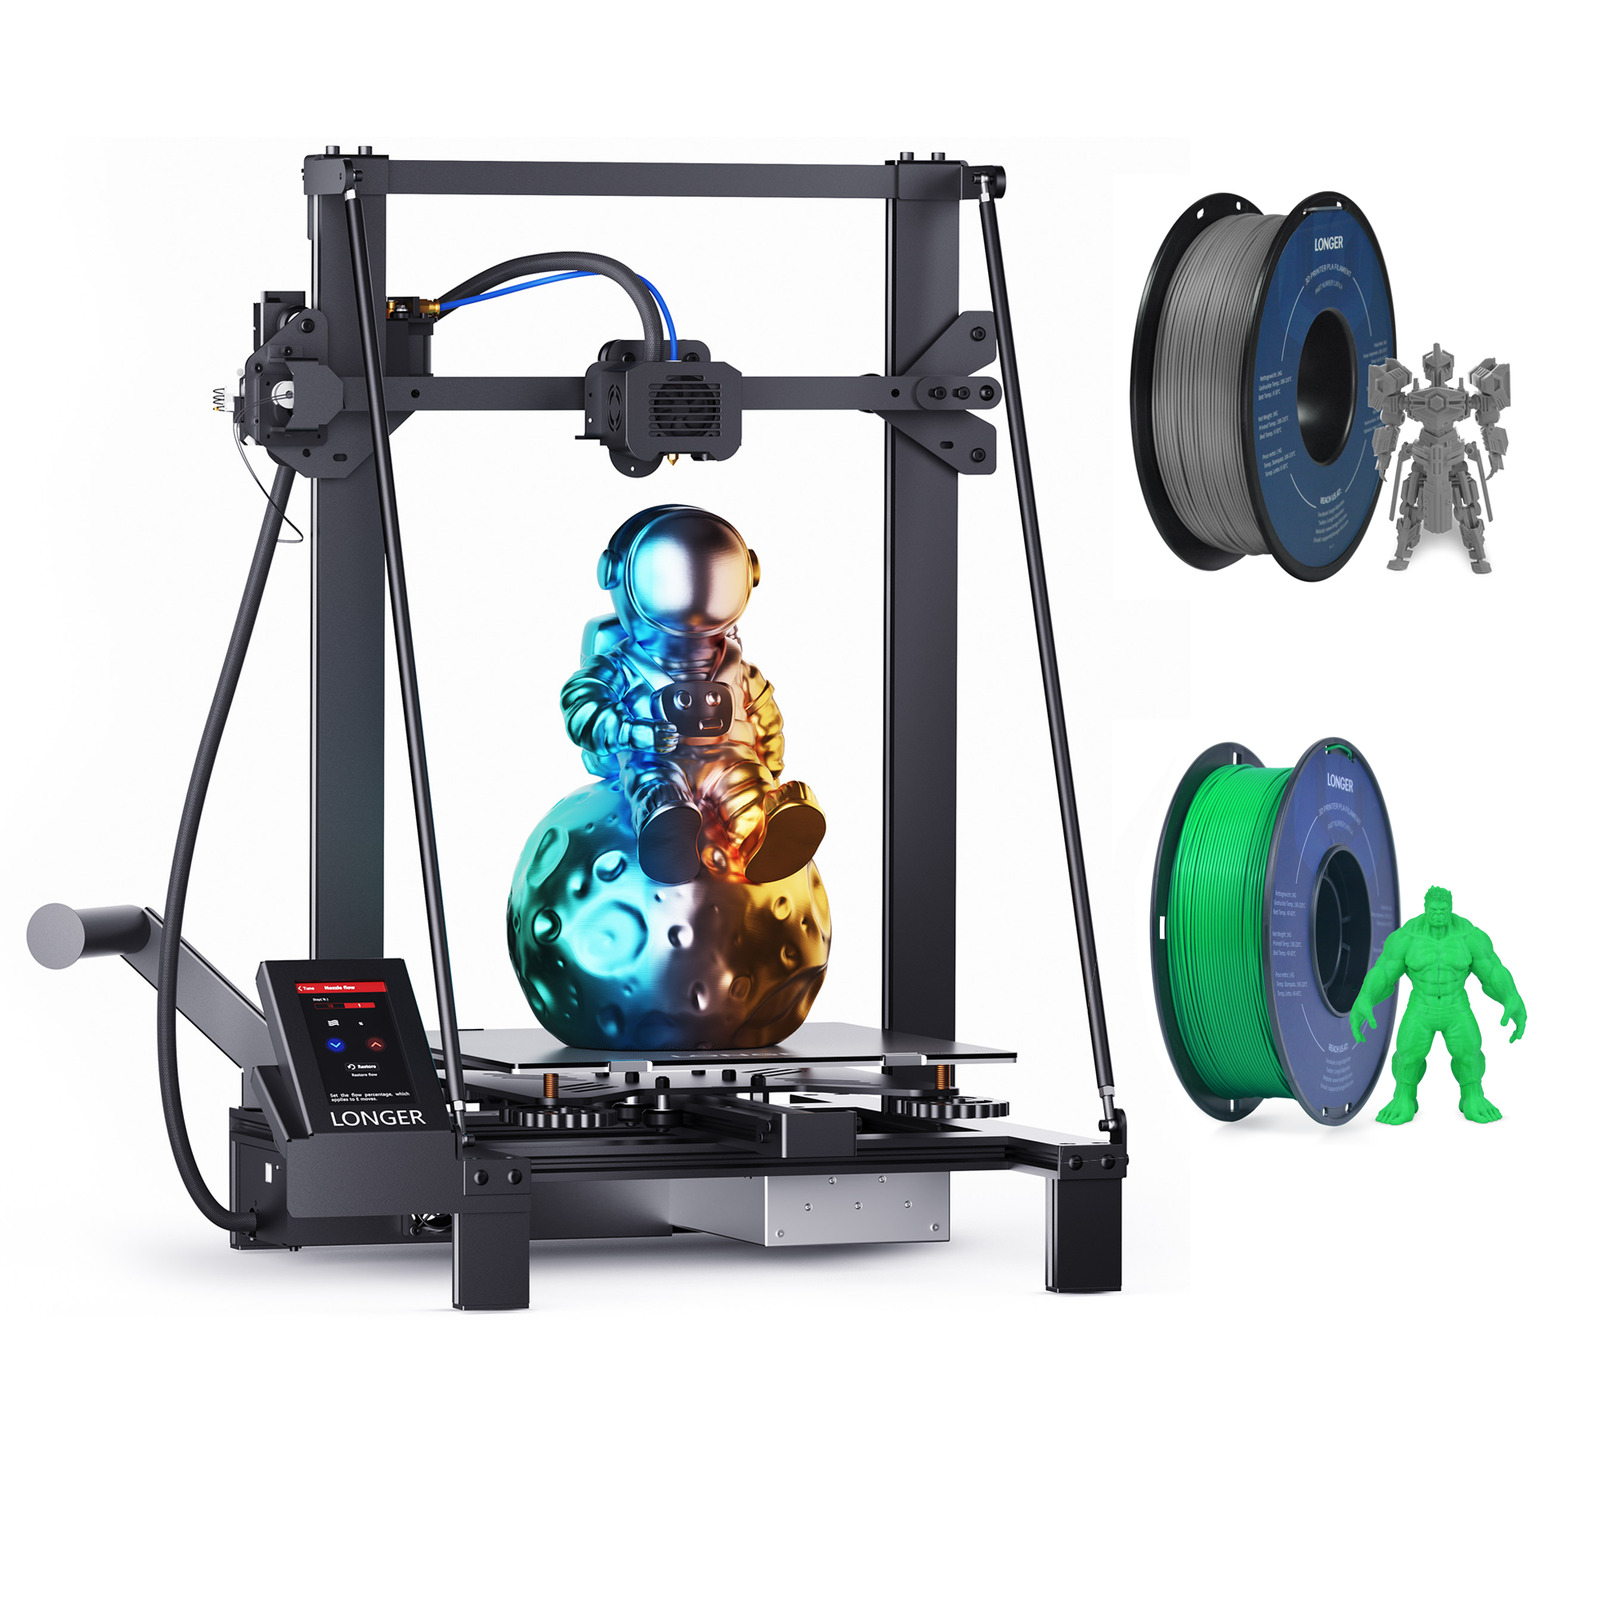 Longer LK5 Pro Silent 3D Printer with automatic bed leveling, and 2 packs of PLA